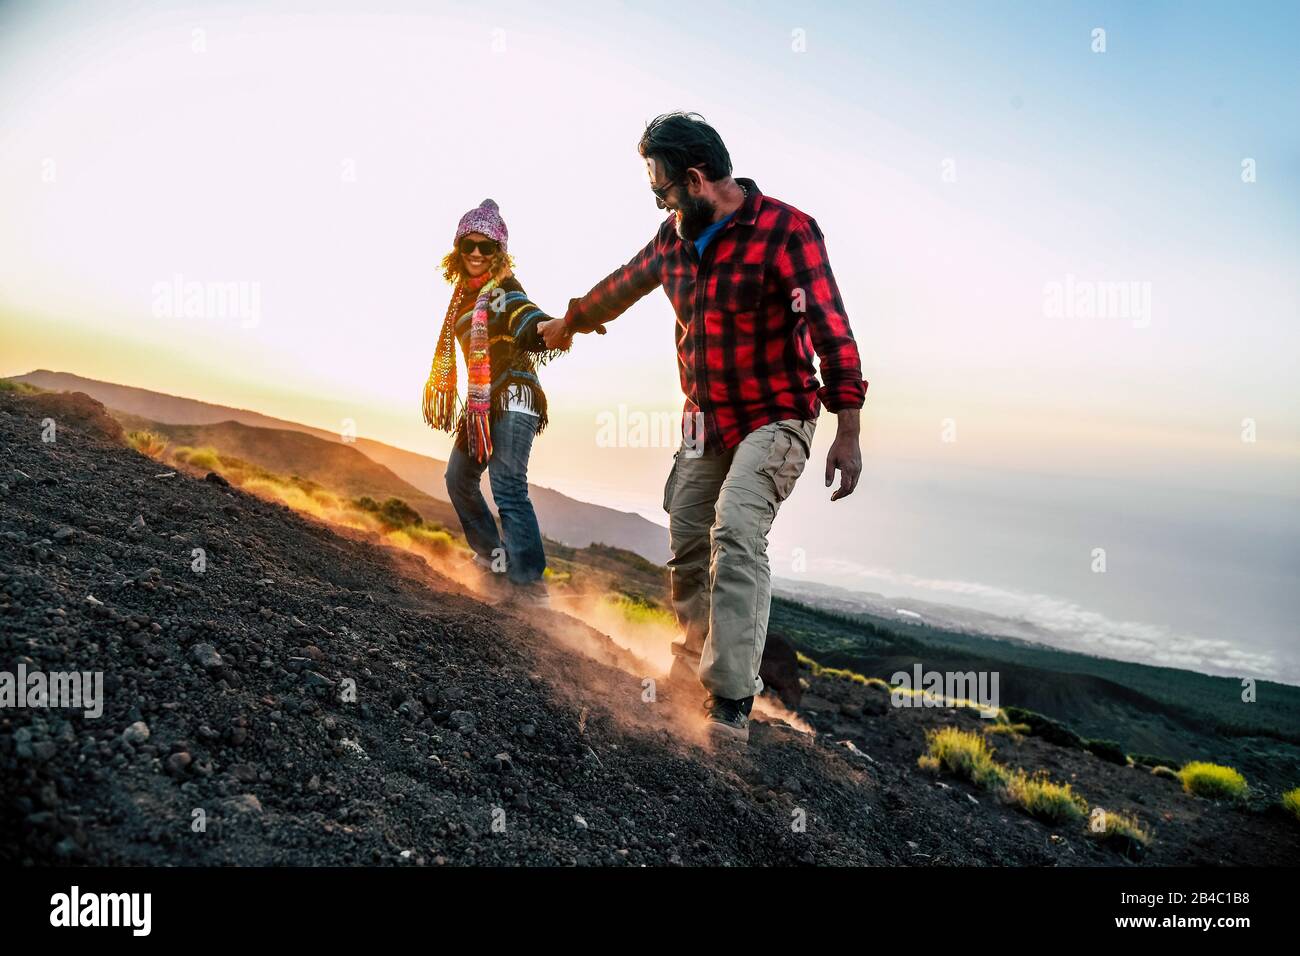 Happy people in outdoor leisure activity at the mountain - trekking active couple holding hand to help and have fun together - beautiful scenic sunset landscape in background - travel and adventure Stock Photo